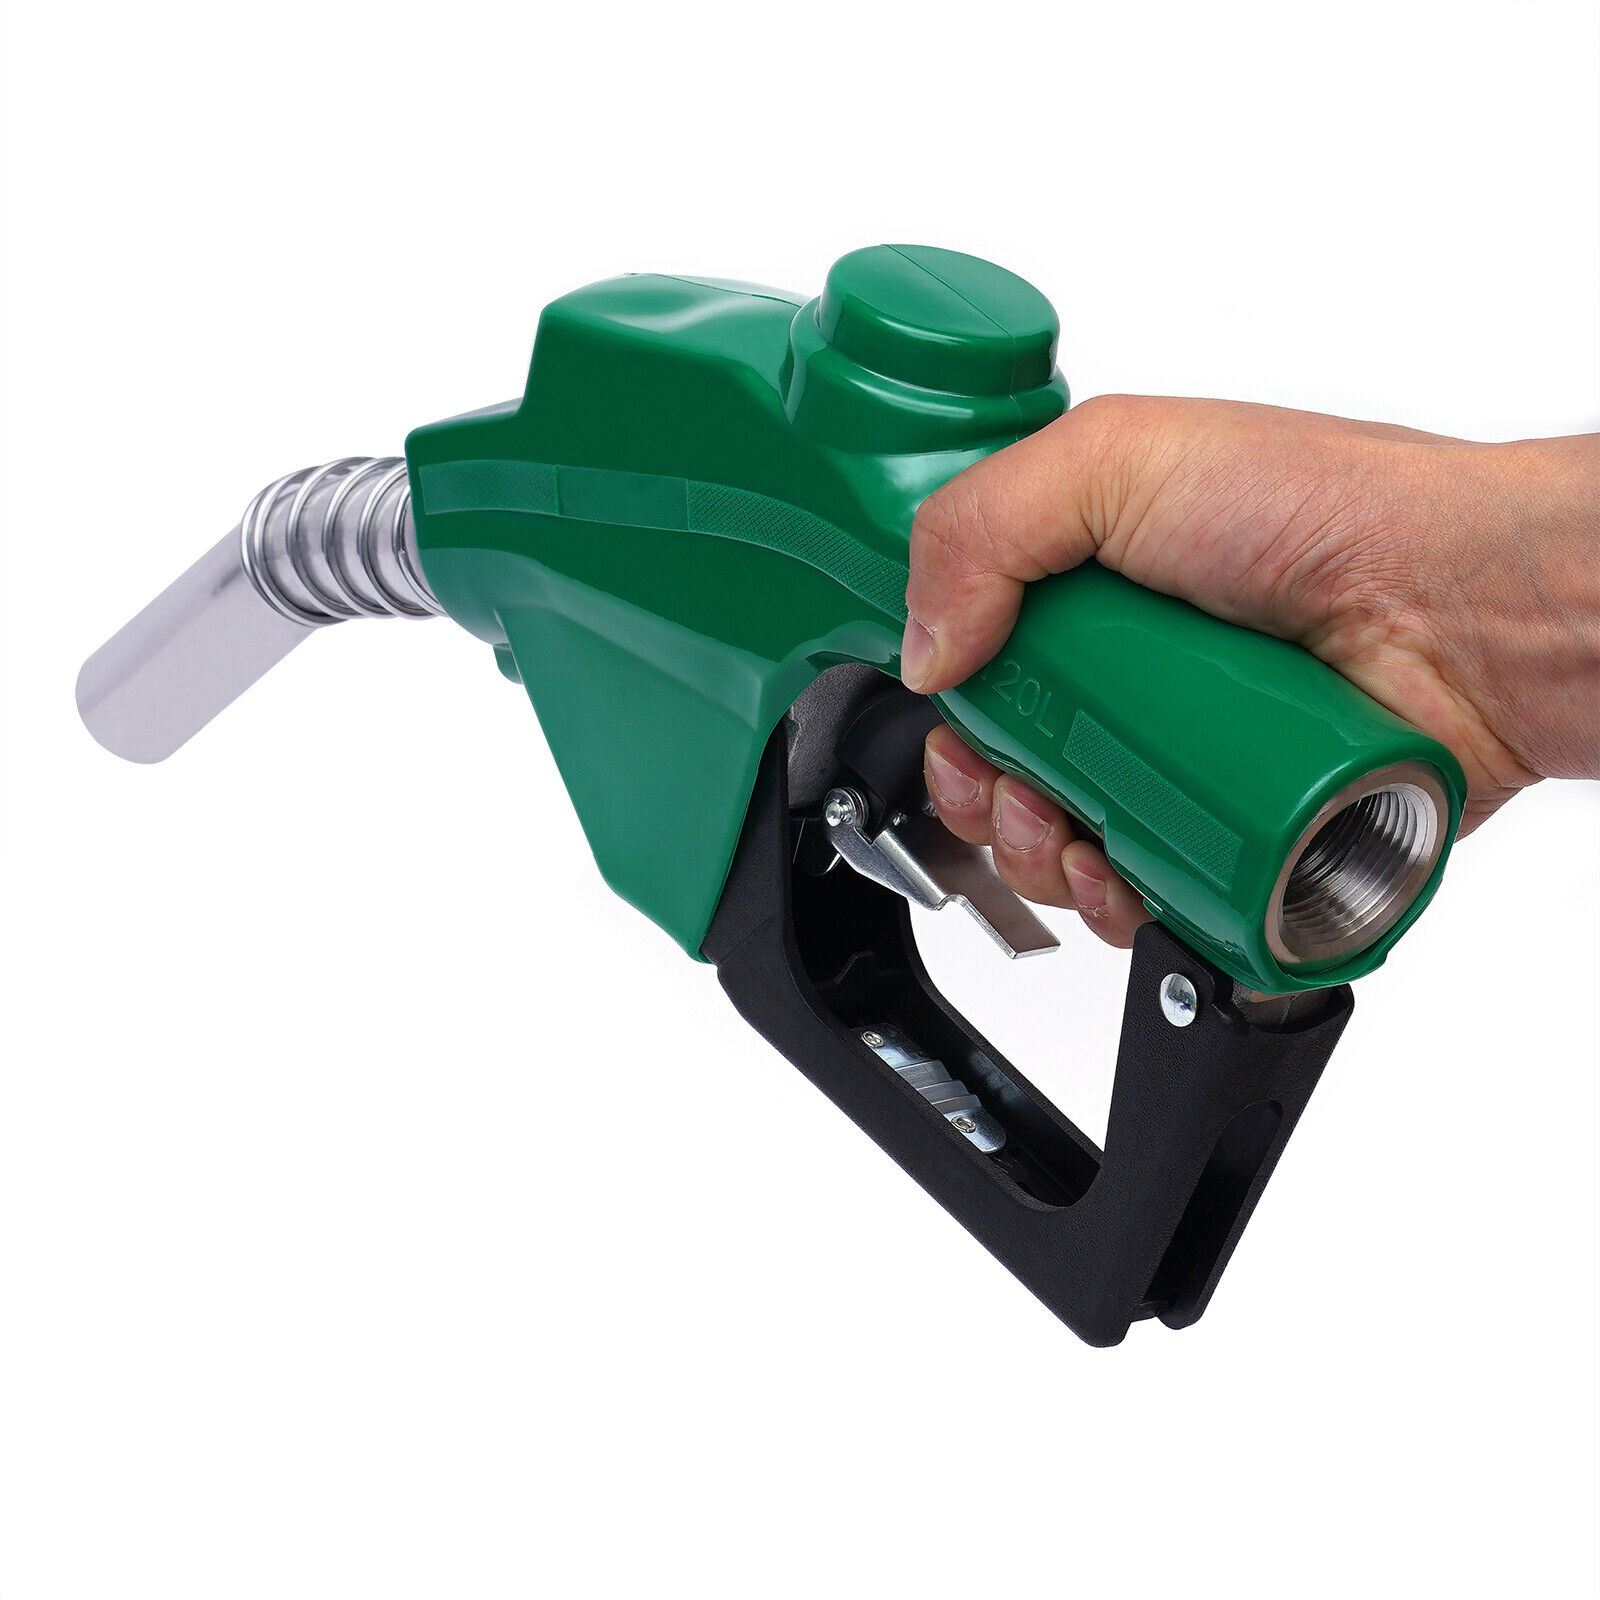 YIYIBYUS Auto Shut-Off Fuel Nozzle Gas Pump Fuel Gun for Gas Stations Fuel Refilling, Max Flow Rate 31.7GAL/Min - image 5 of 12